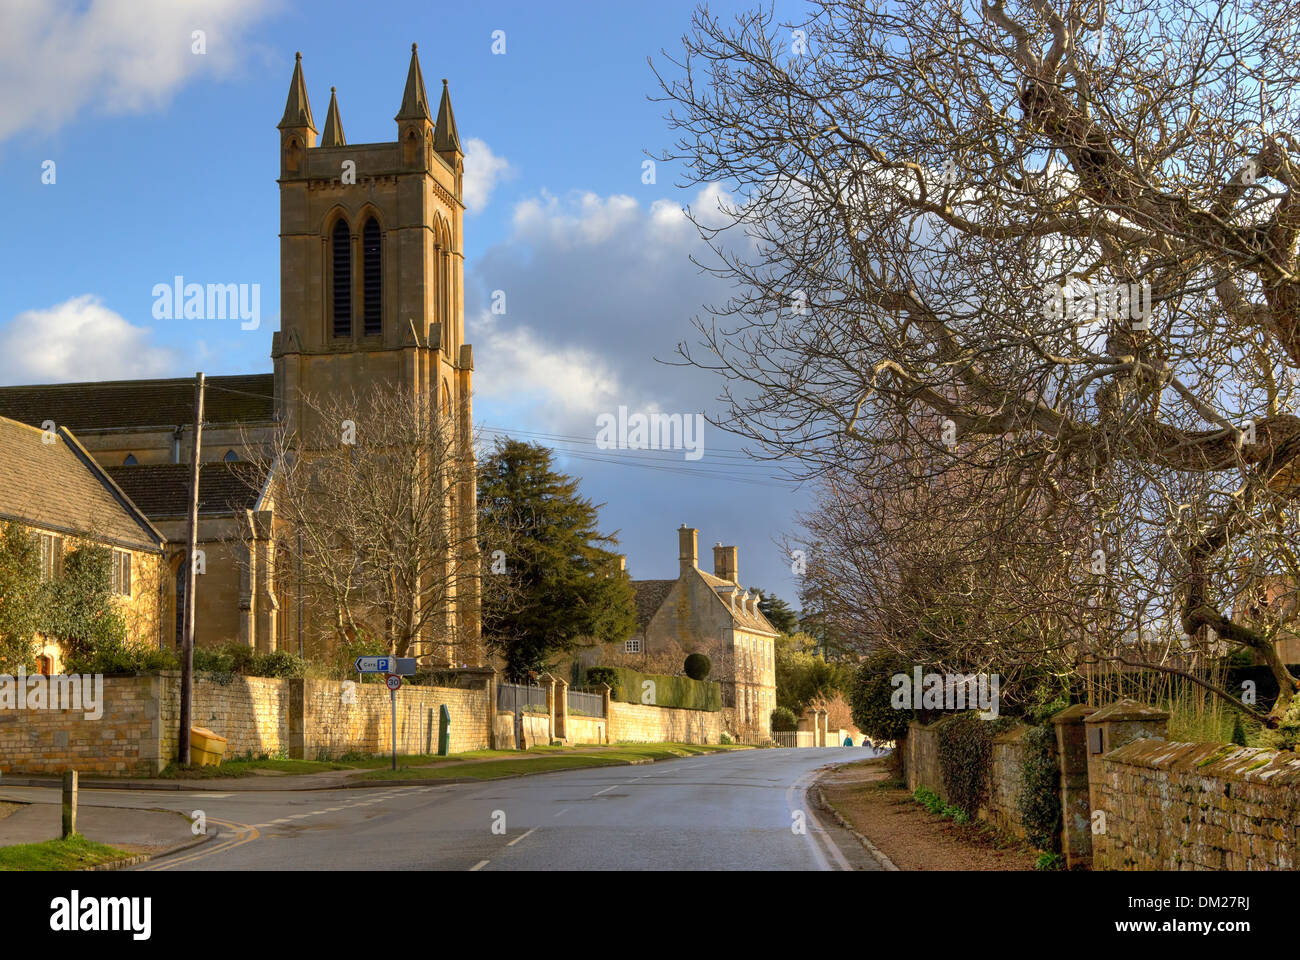 The Cotswold village of Broadway, Worcestershire, England. Stock Photo